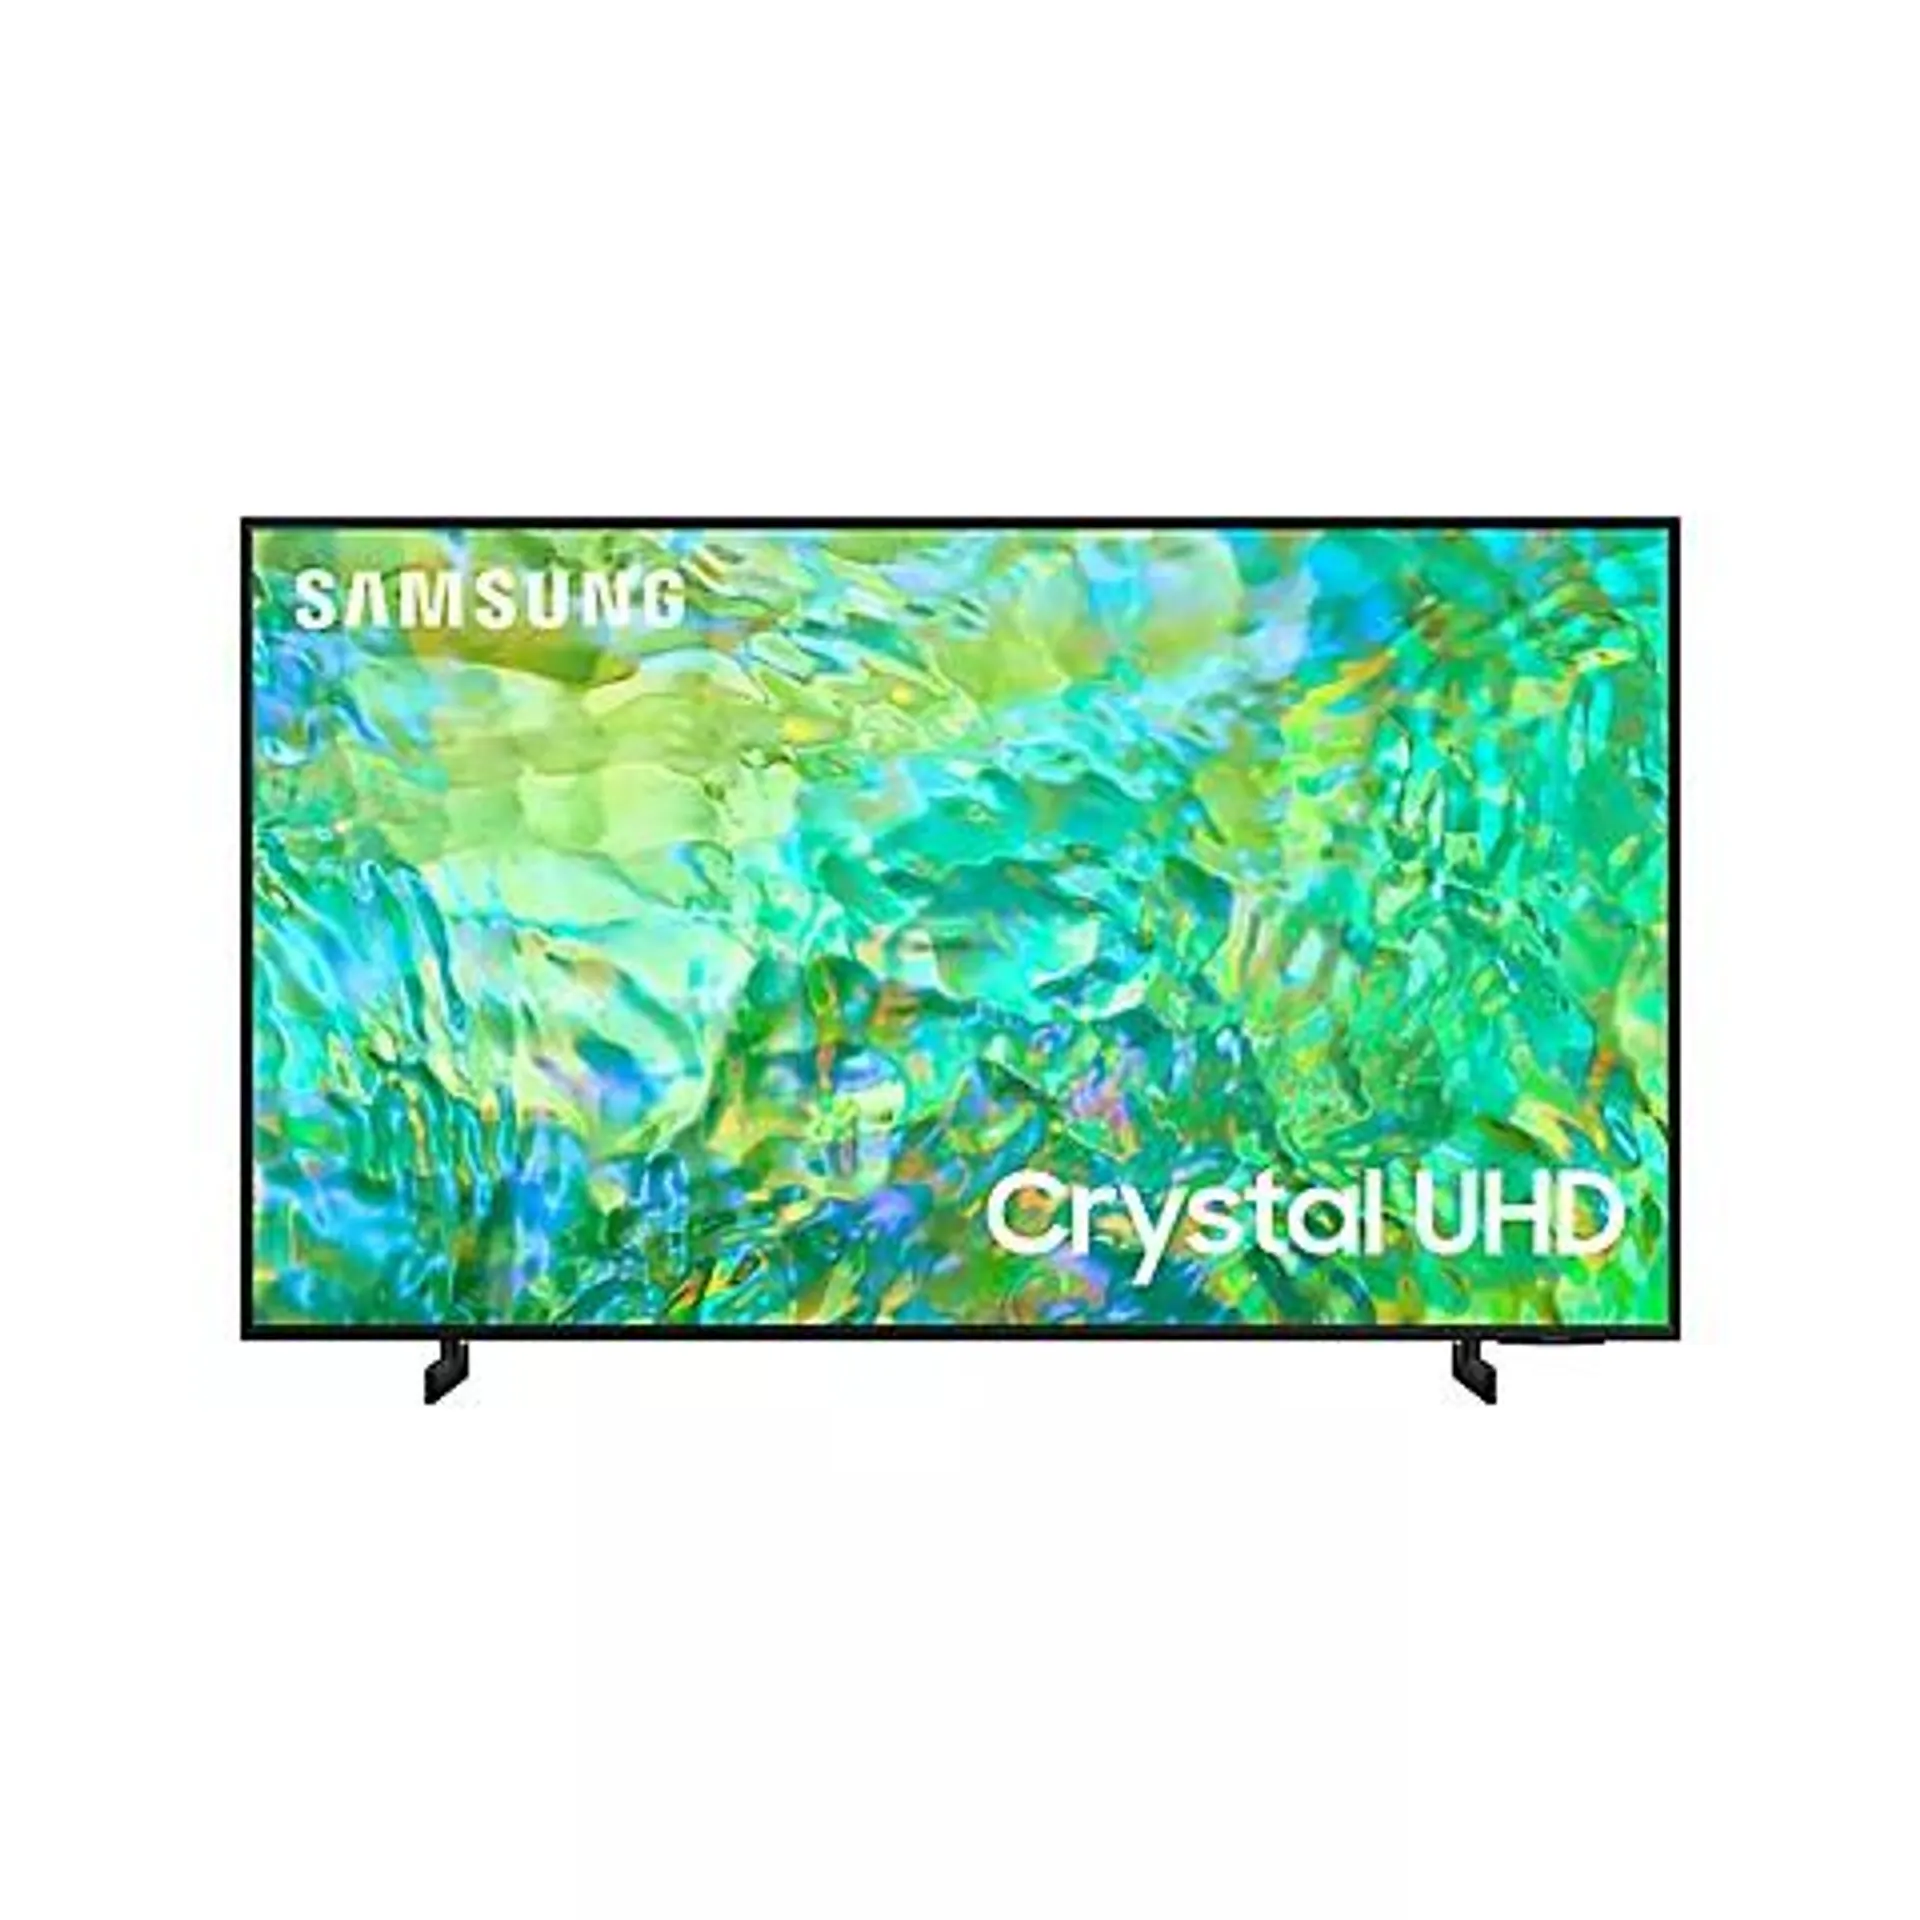 Samsung 55" CU8000 Crystal UHD 4K Smart TV with 4-Year Coverage